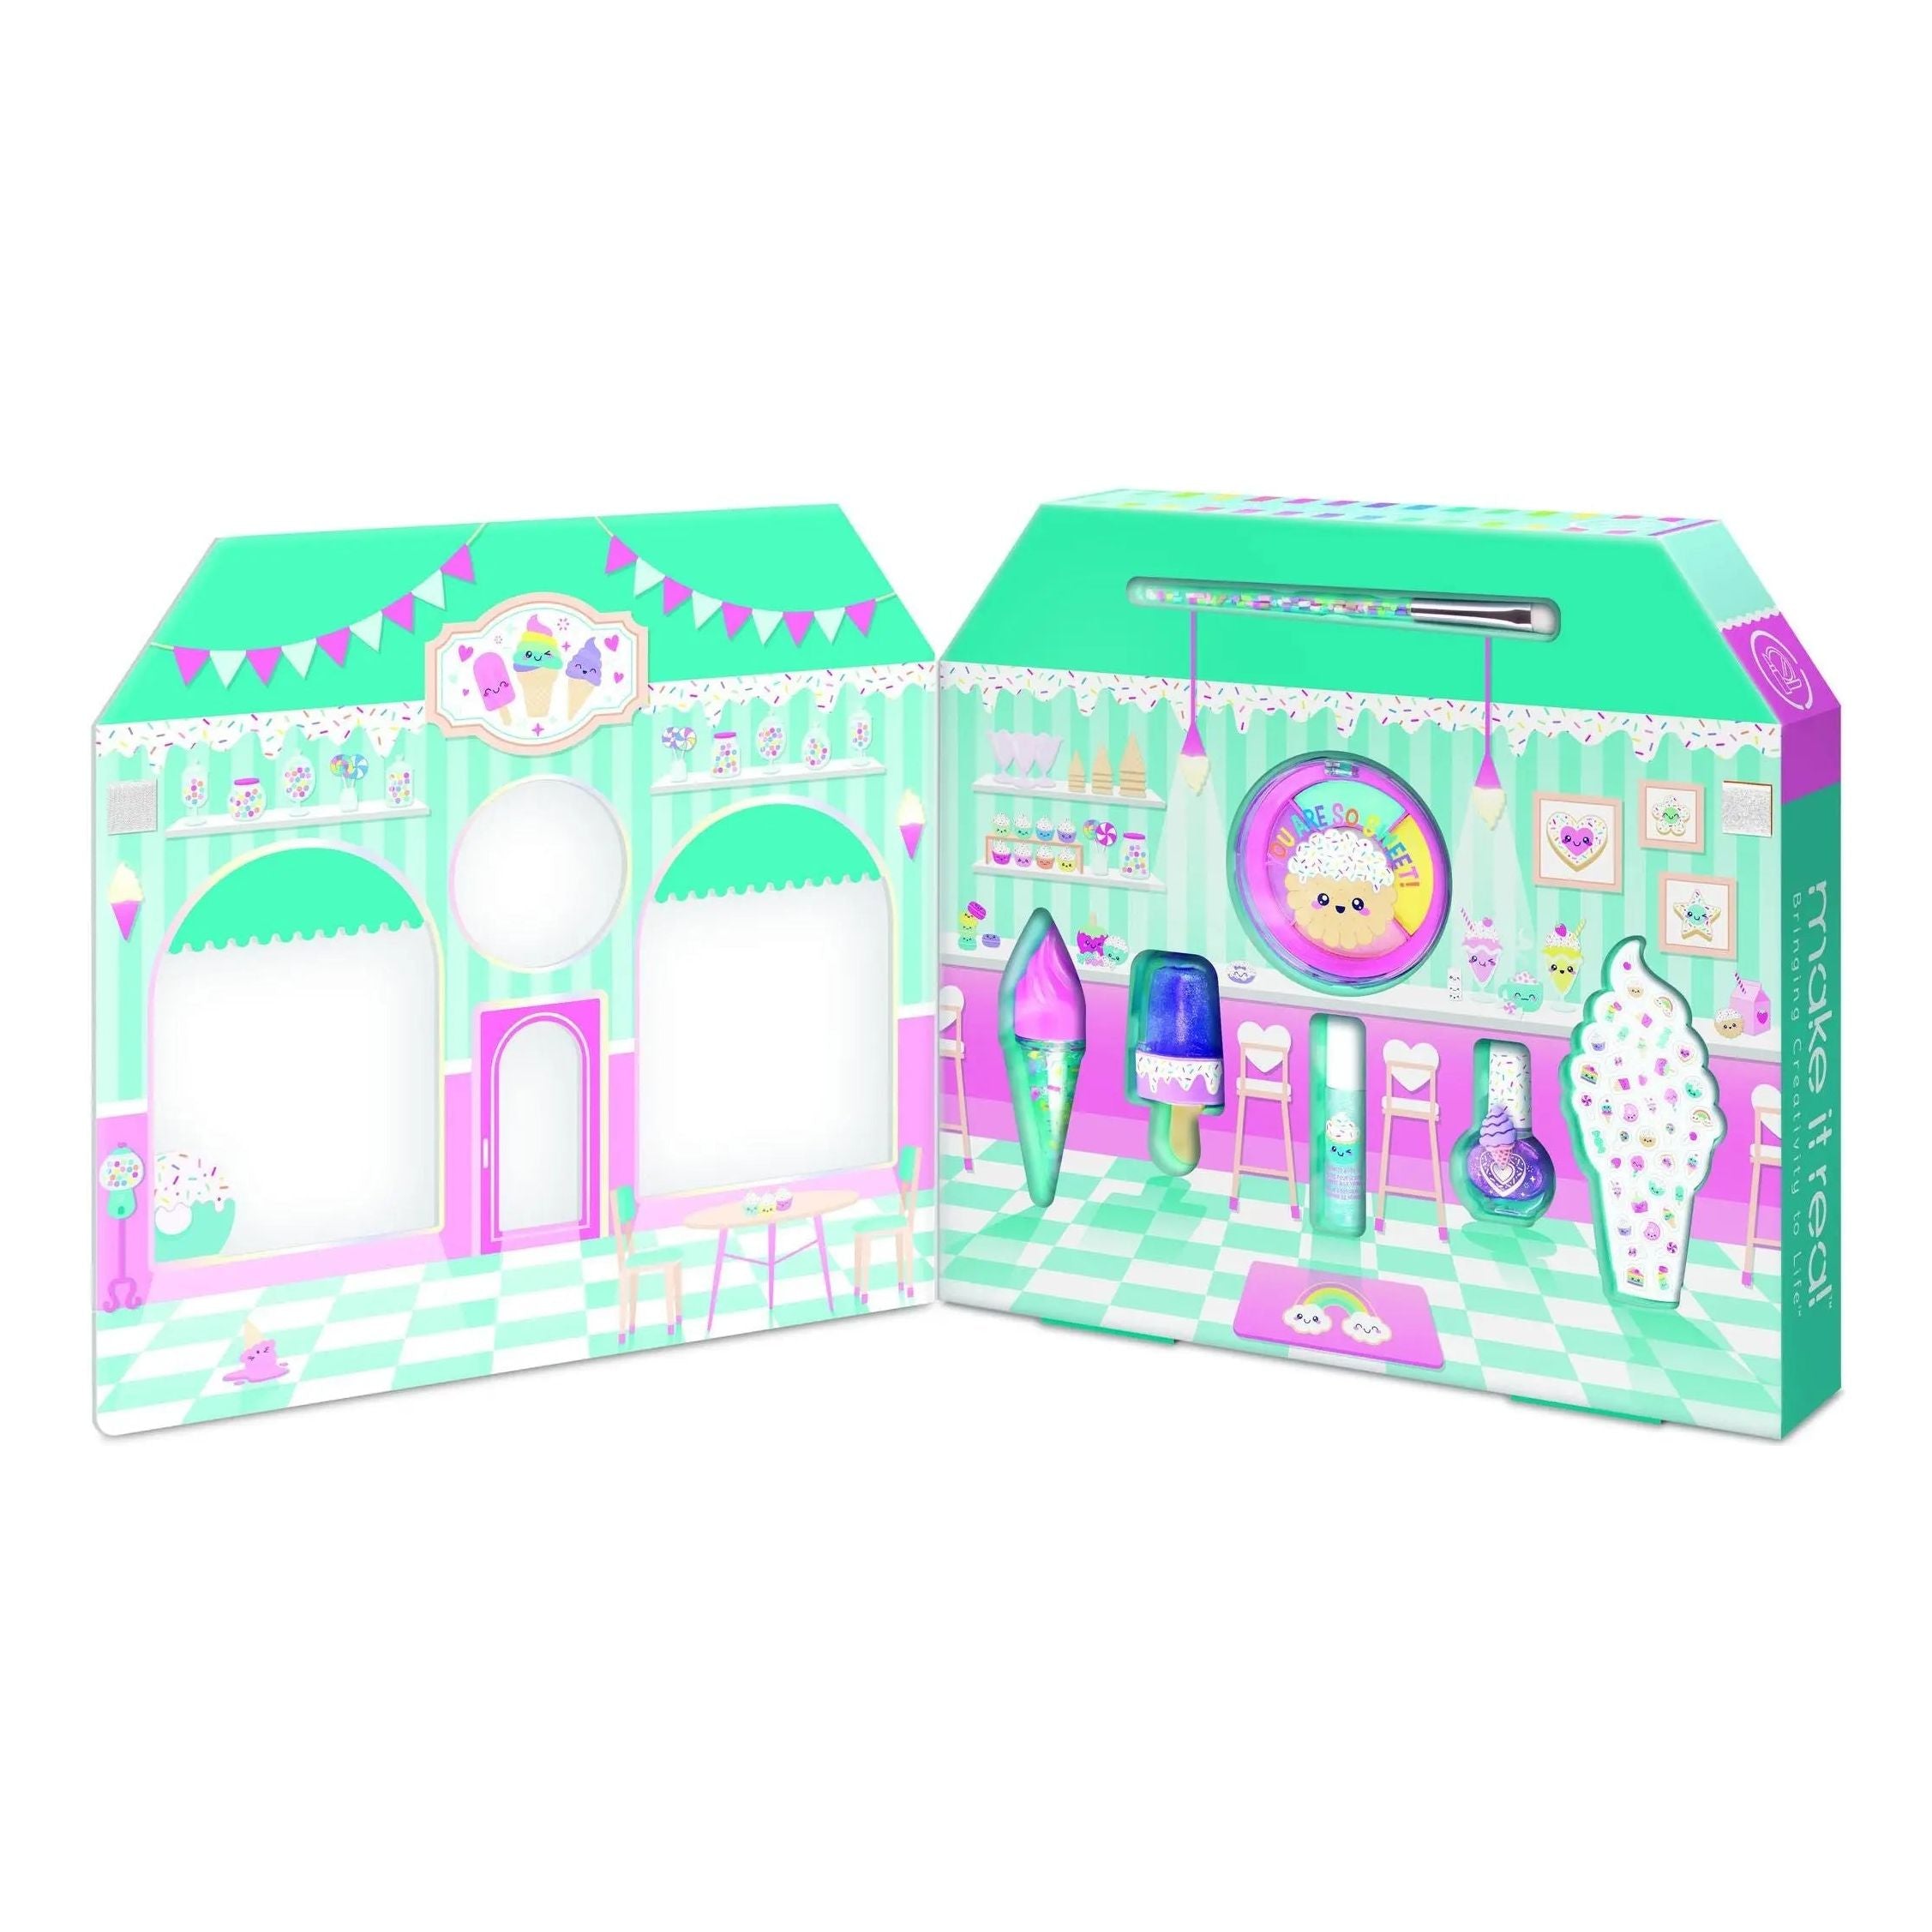 Candy Shop Cosmetic Set